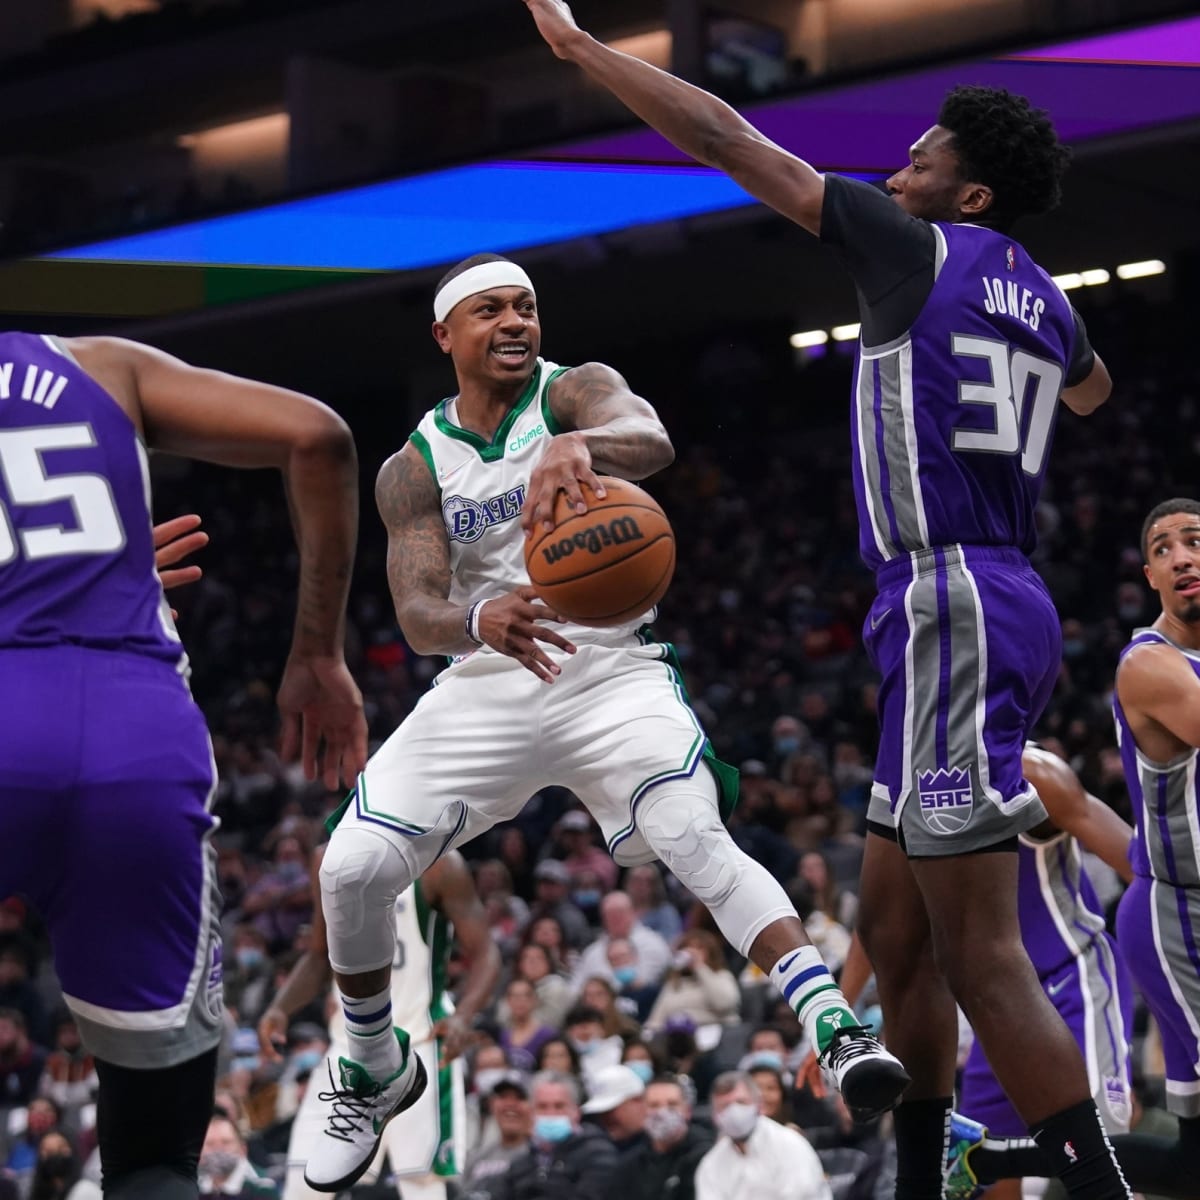 Isaiah Thomas Signs with Charlotte, Joins 10th NBA Franchise